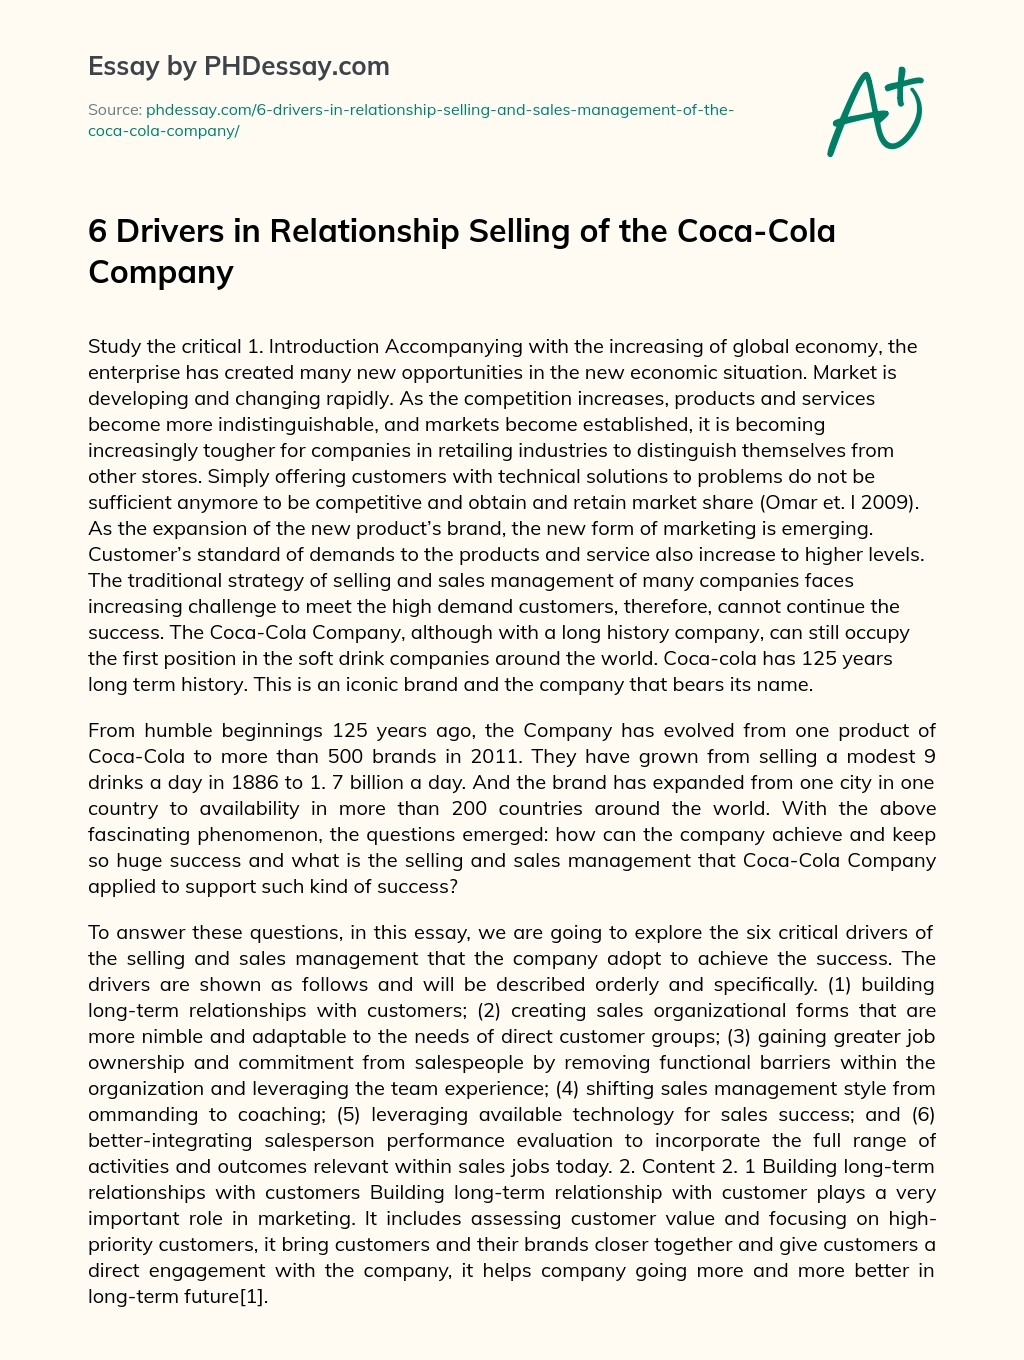 6 Drivers in Relationship Selling of the Coca-Cola Company essay